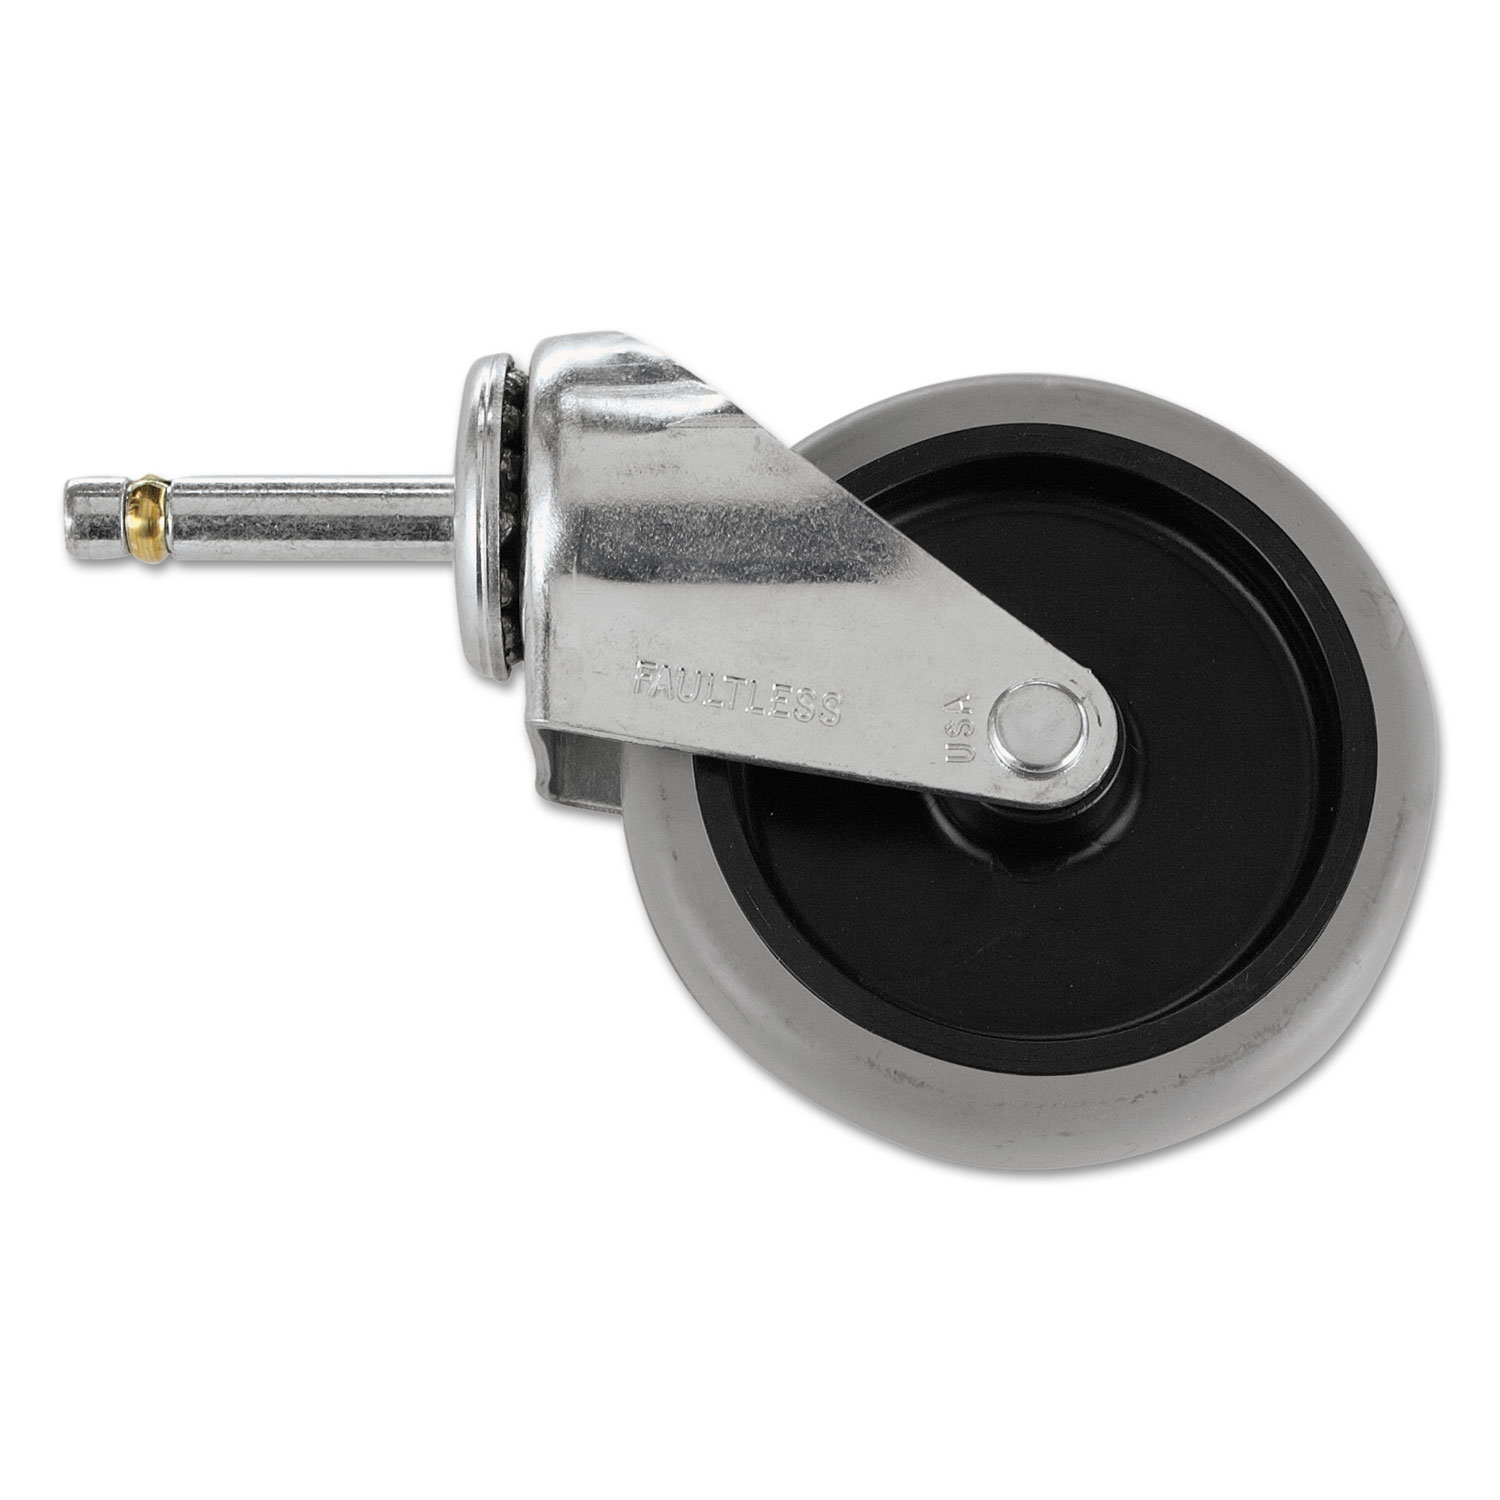 Replacement Swivel Bayonet Casters, 4